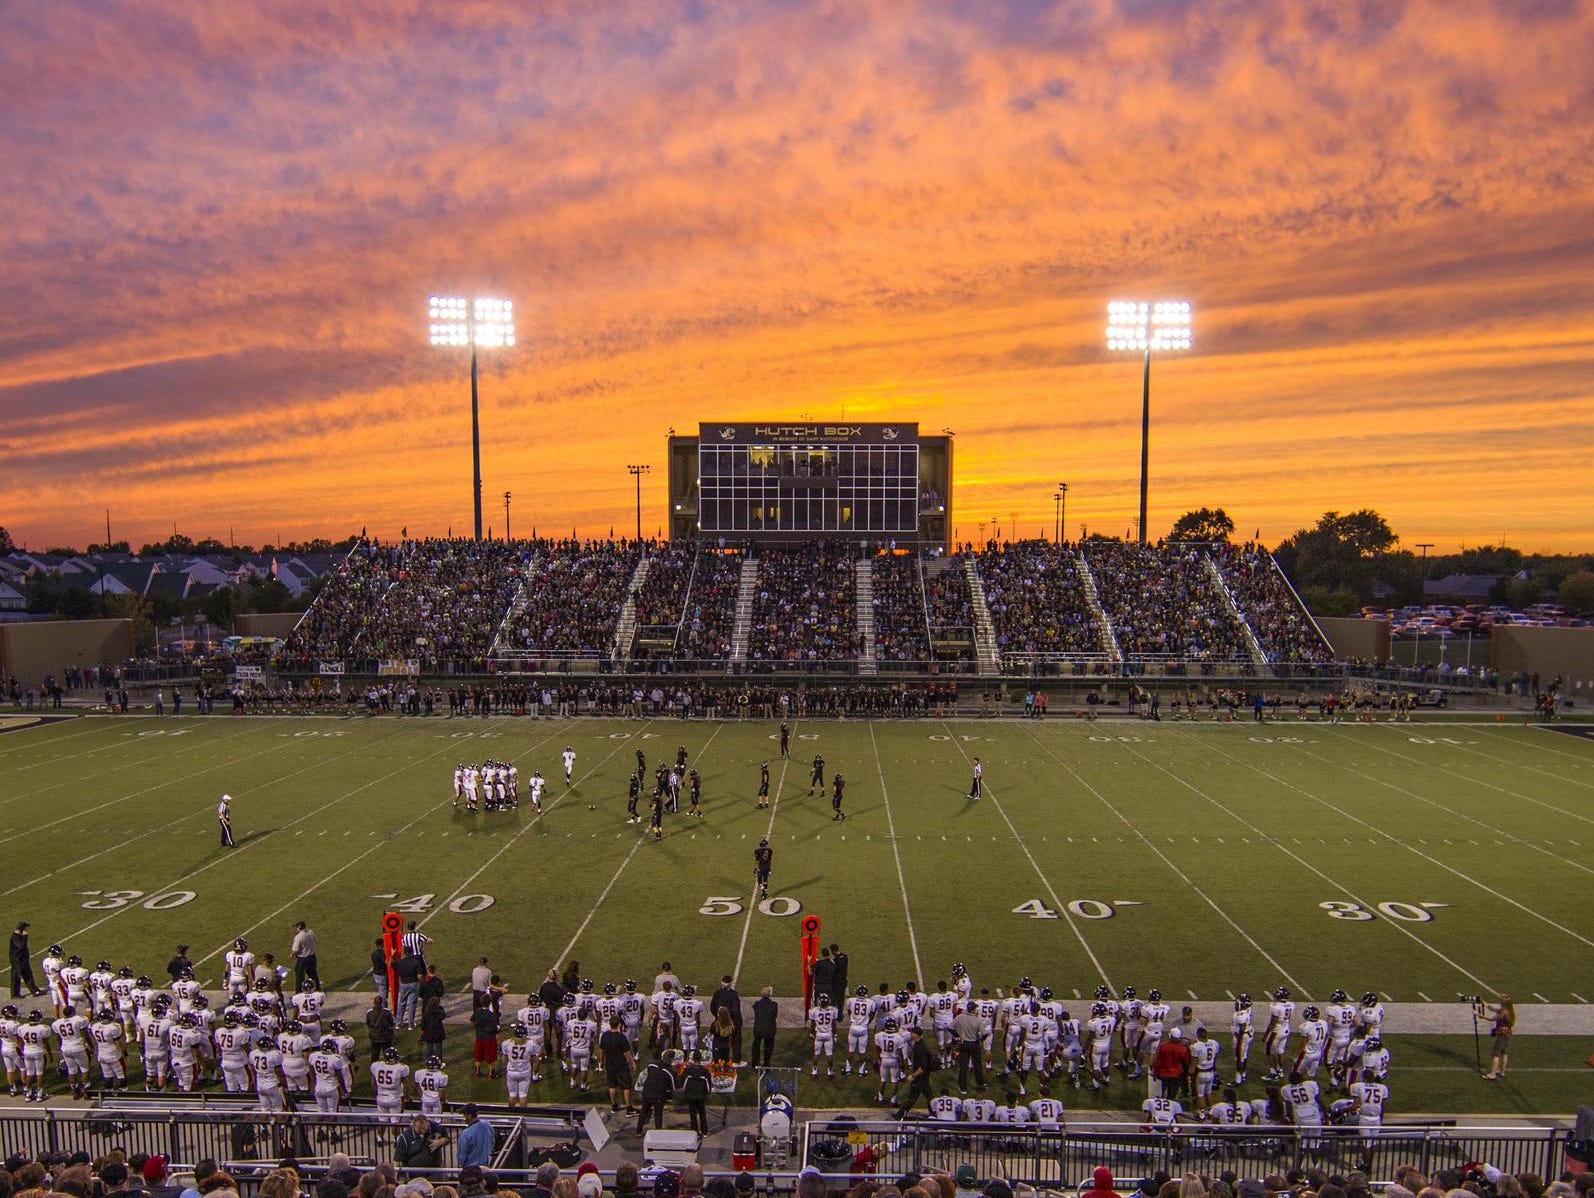 The Bentonville Tigers football team plays a September 2013 game vs. Euless Trinity from Texas. The stadium holds 6,000 people at capacity.